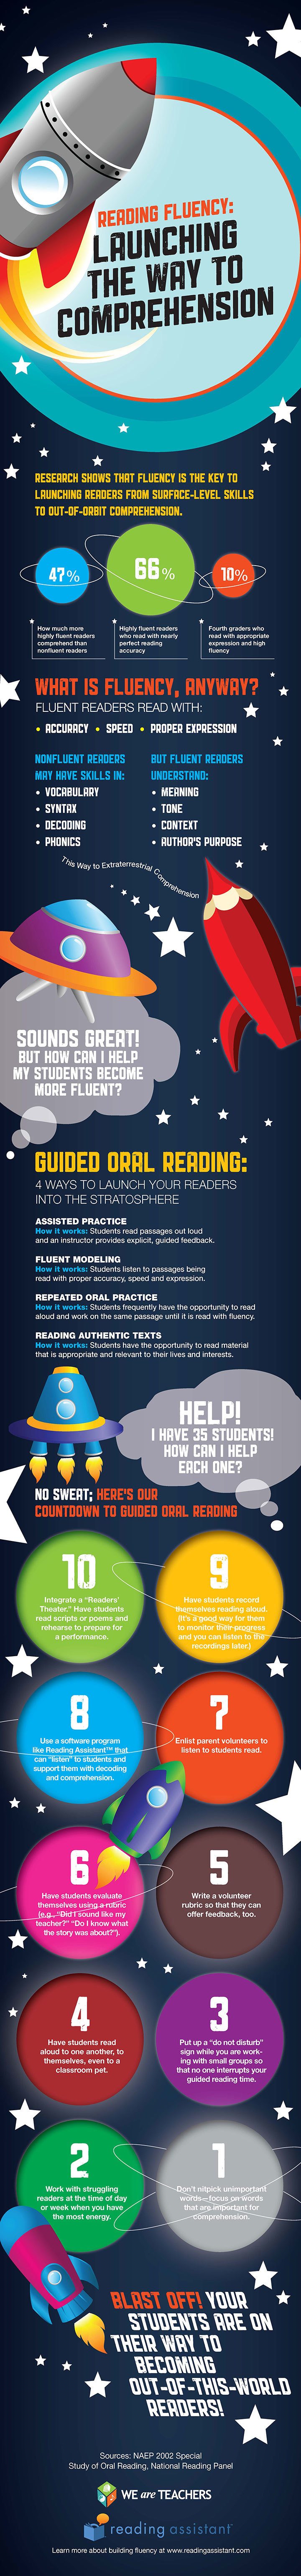 Launching the Way to Reading Comprehension Infographic